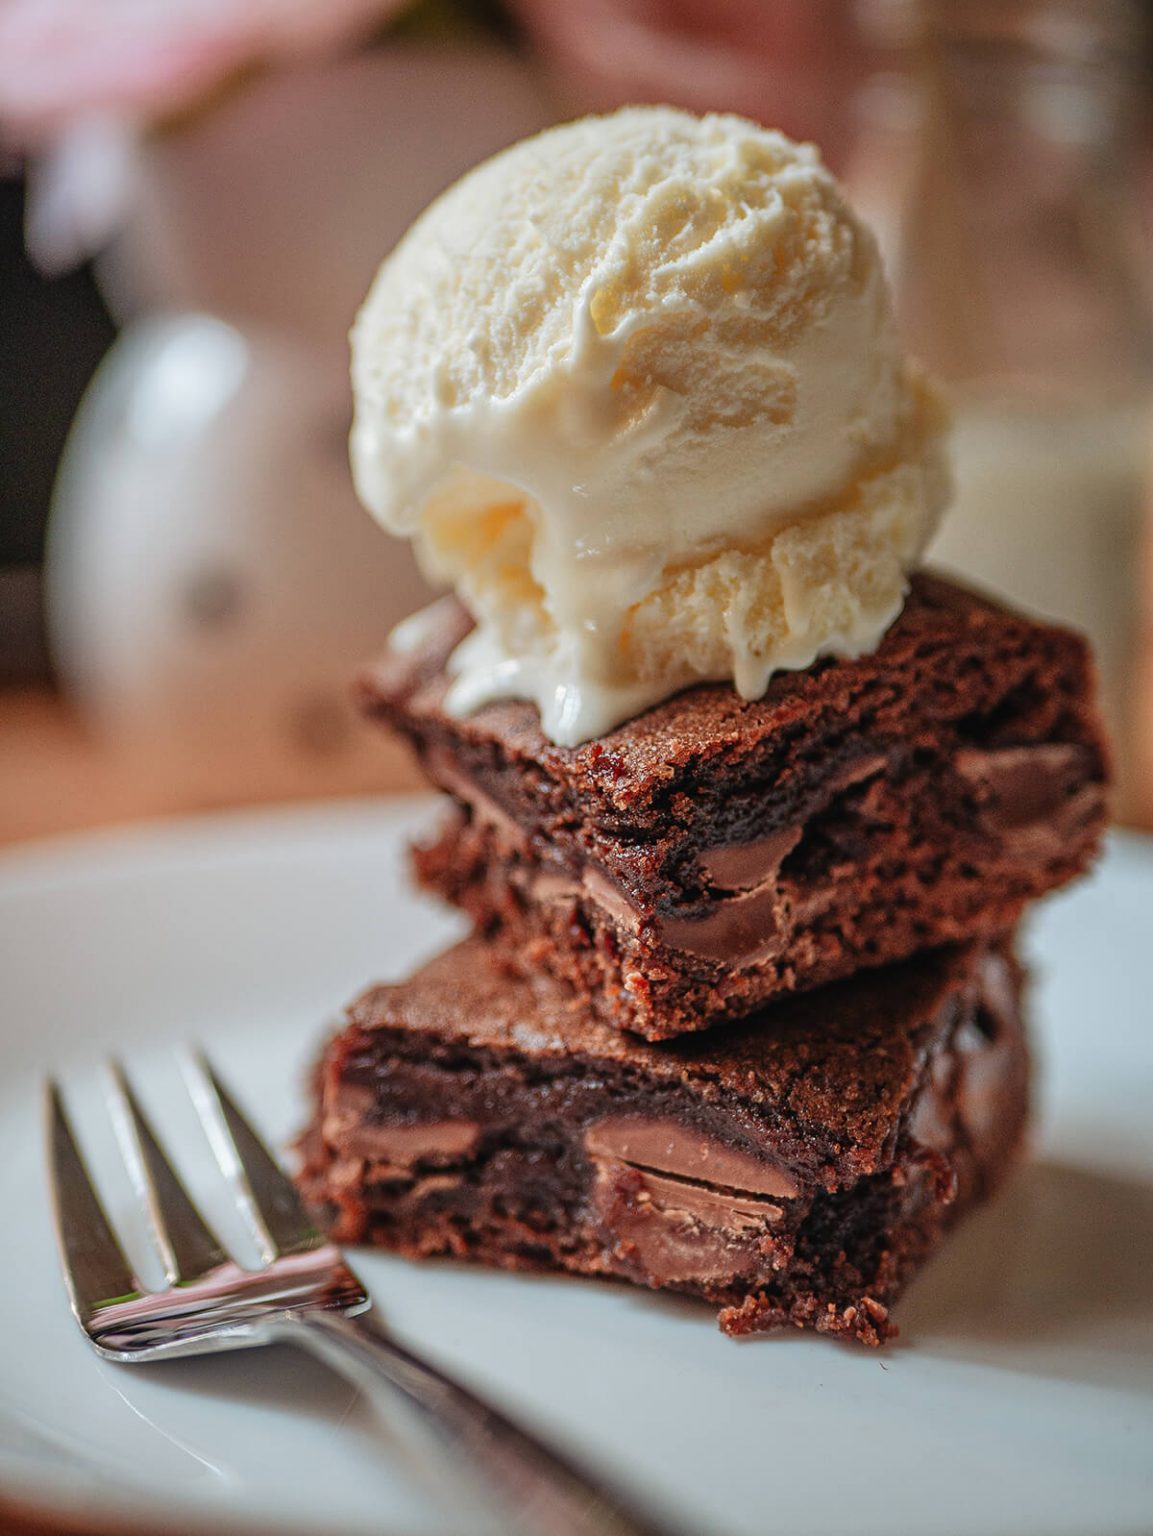 Can you resist this chocolatey goodness of brownies with ice-cream?